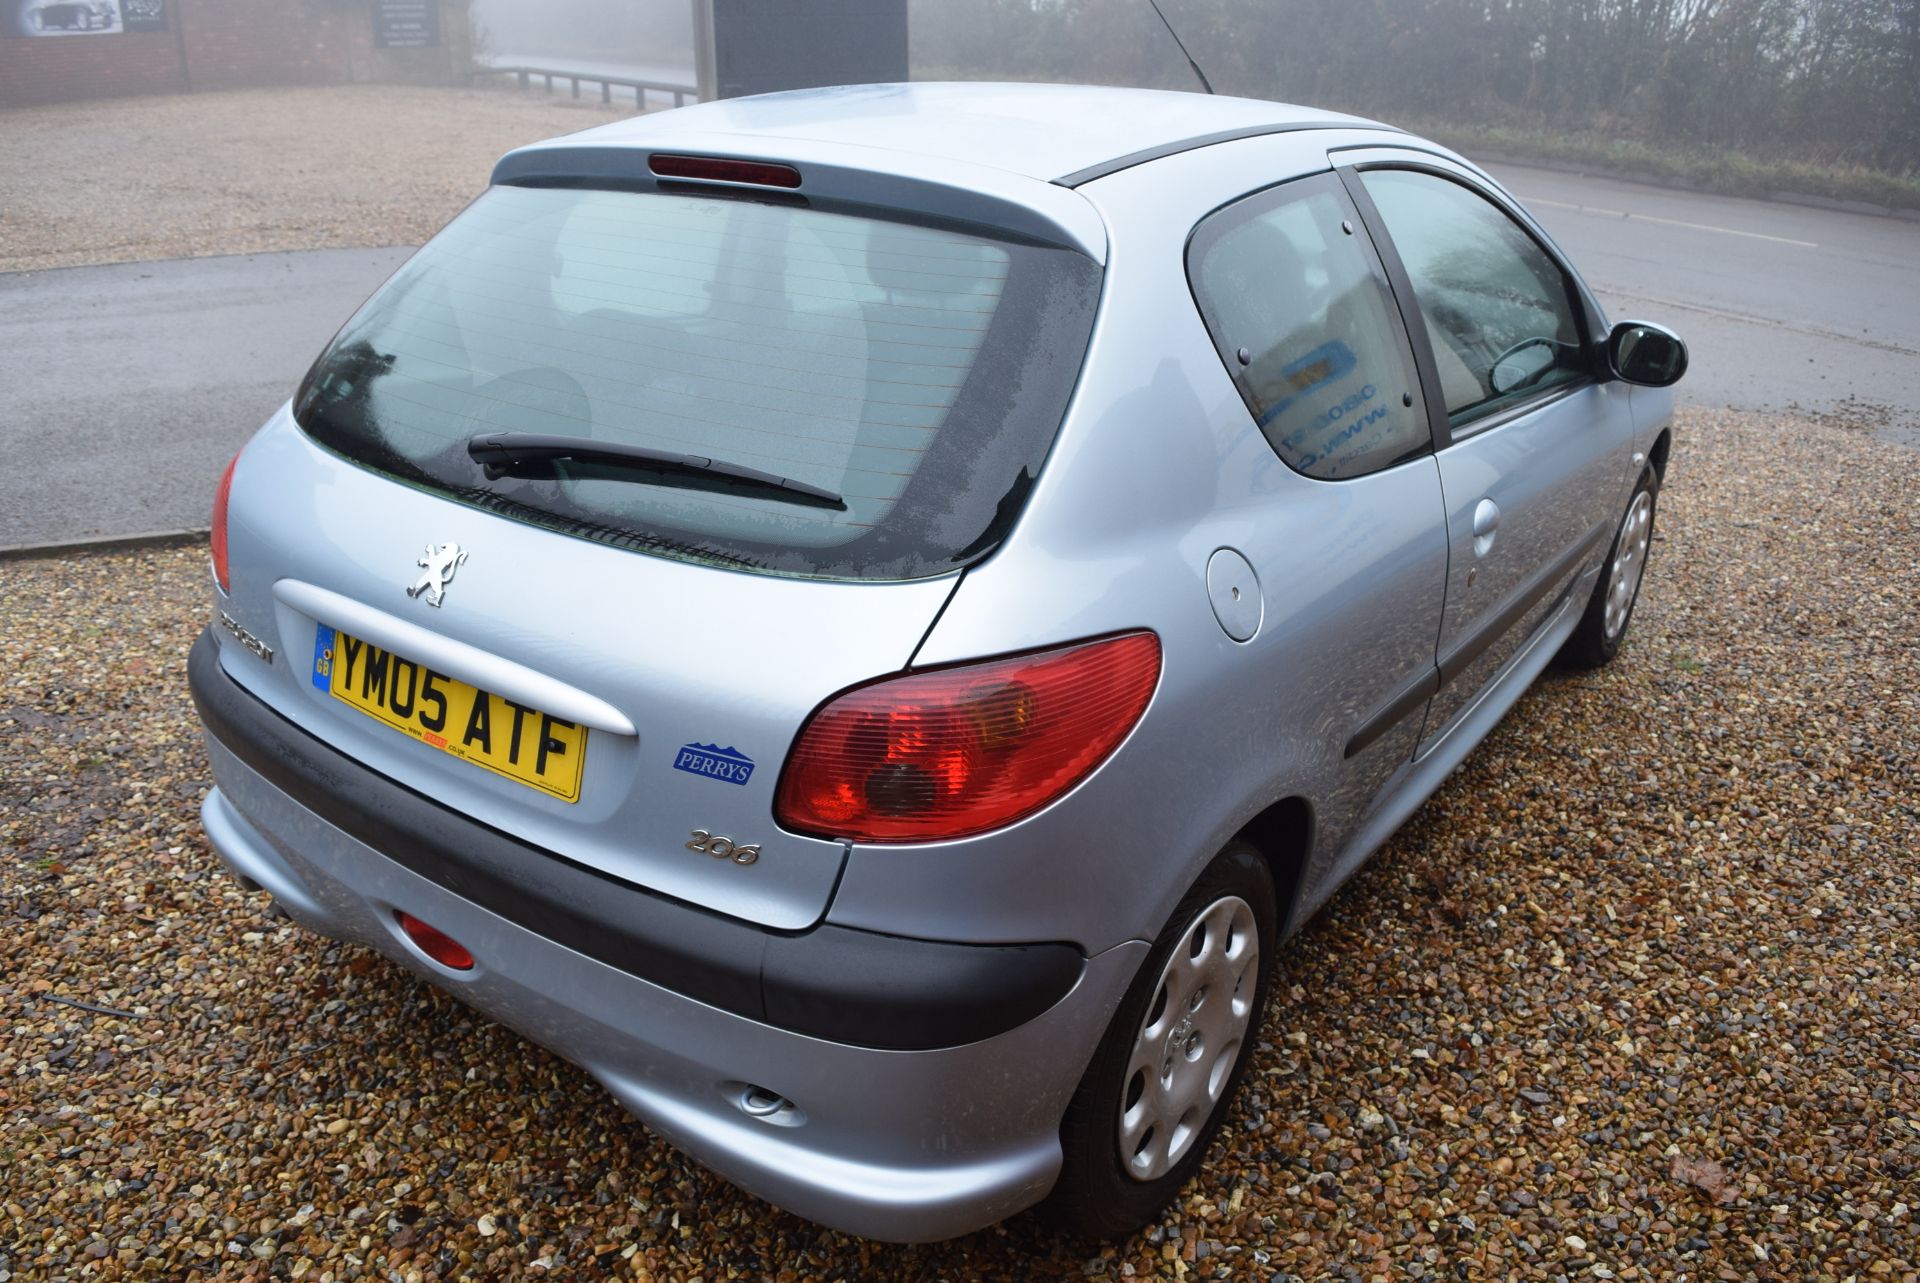 A PEUGEOT 206 S 1.1 Petrol 3-Door Saloon, Registration No. YM05 ATF, First Registered: 30/06/2005, - Image 7 of 10